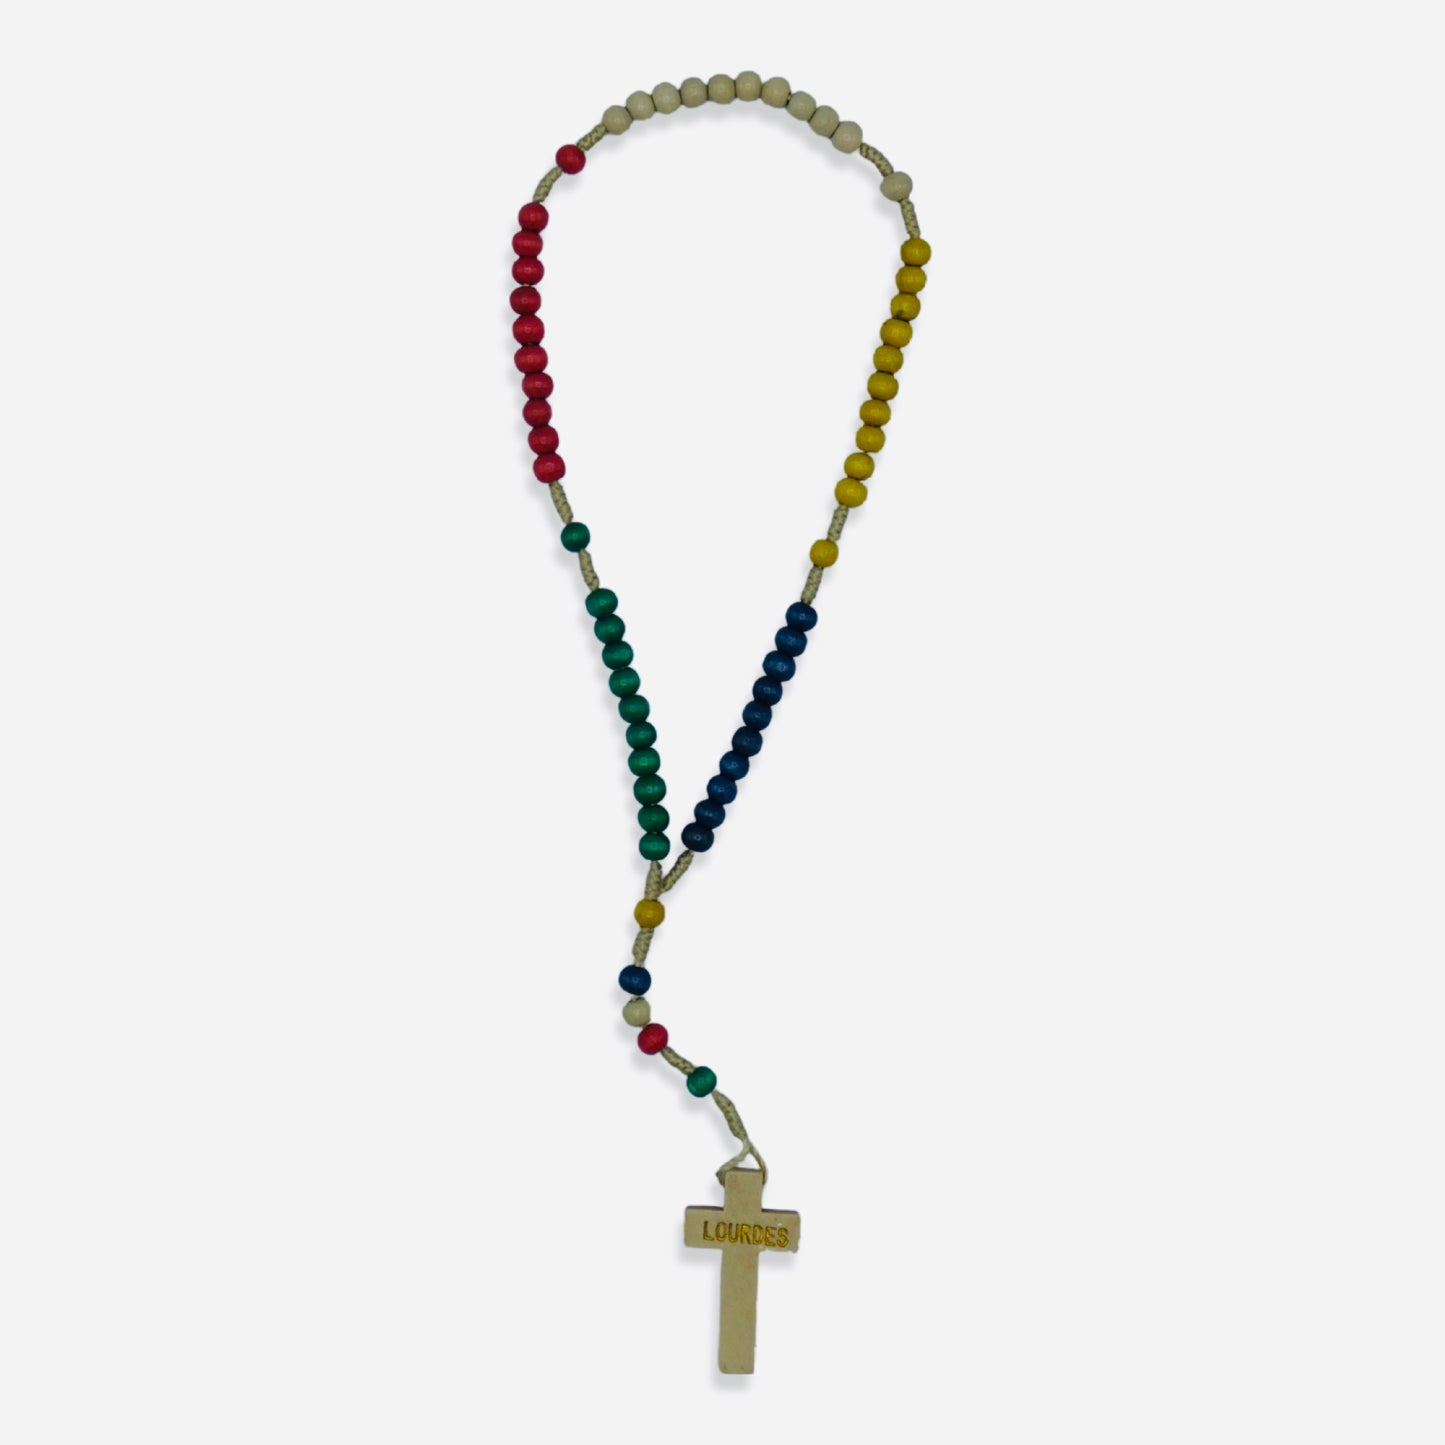 Lourdes Missionary Rosary